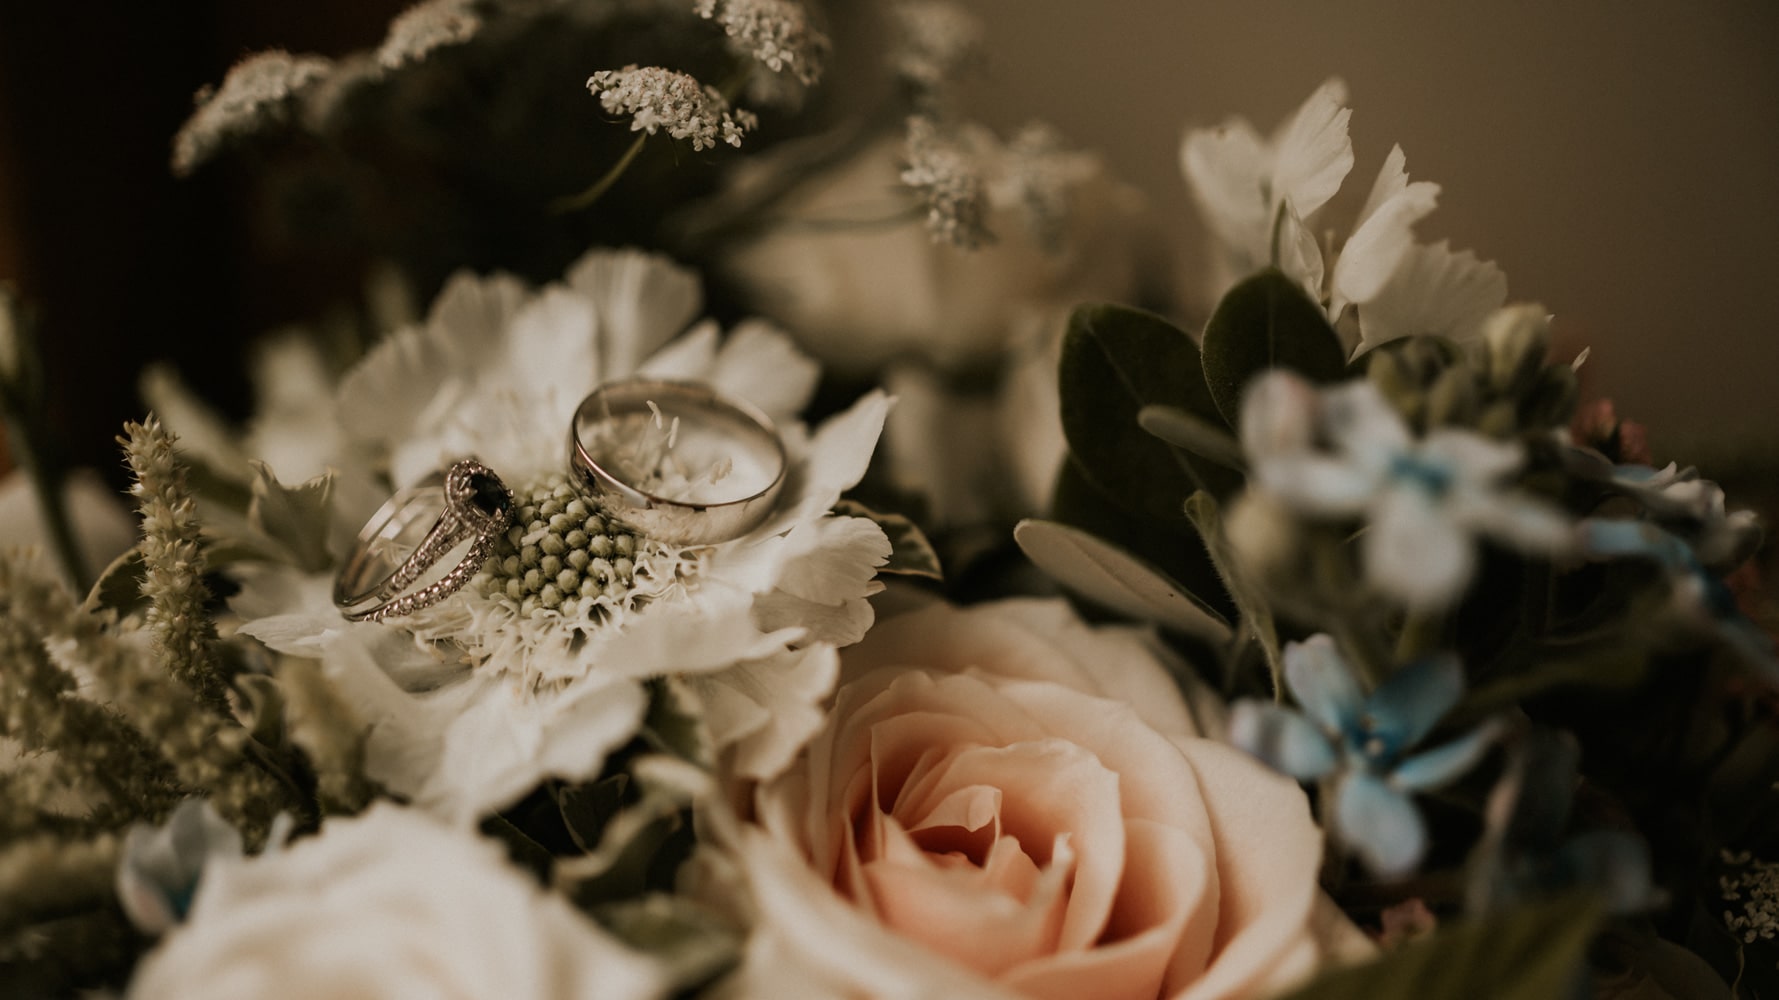 Lucy wedding rings with flowers